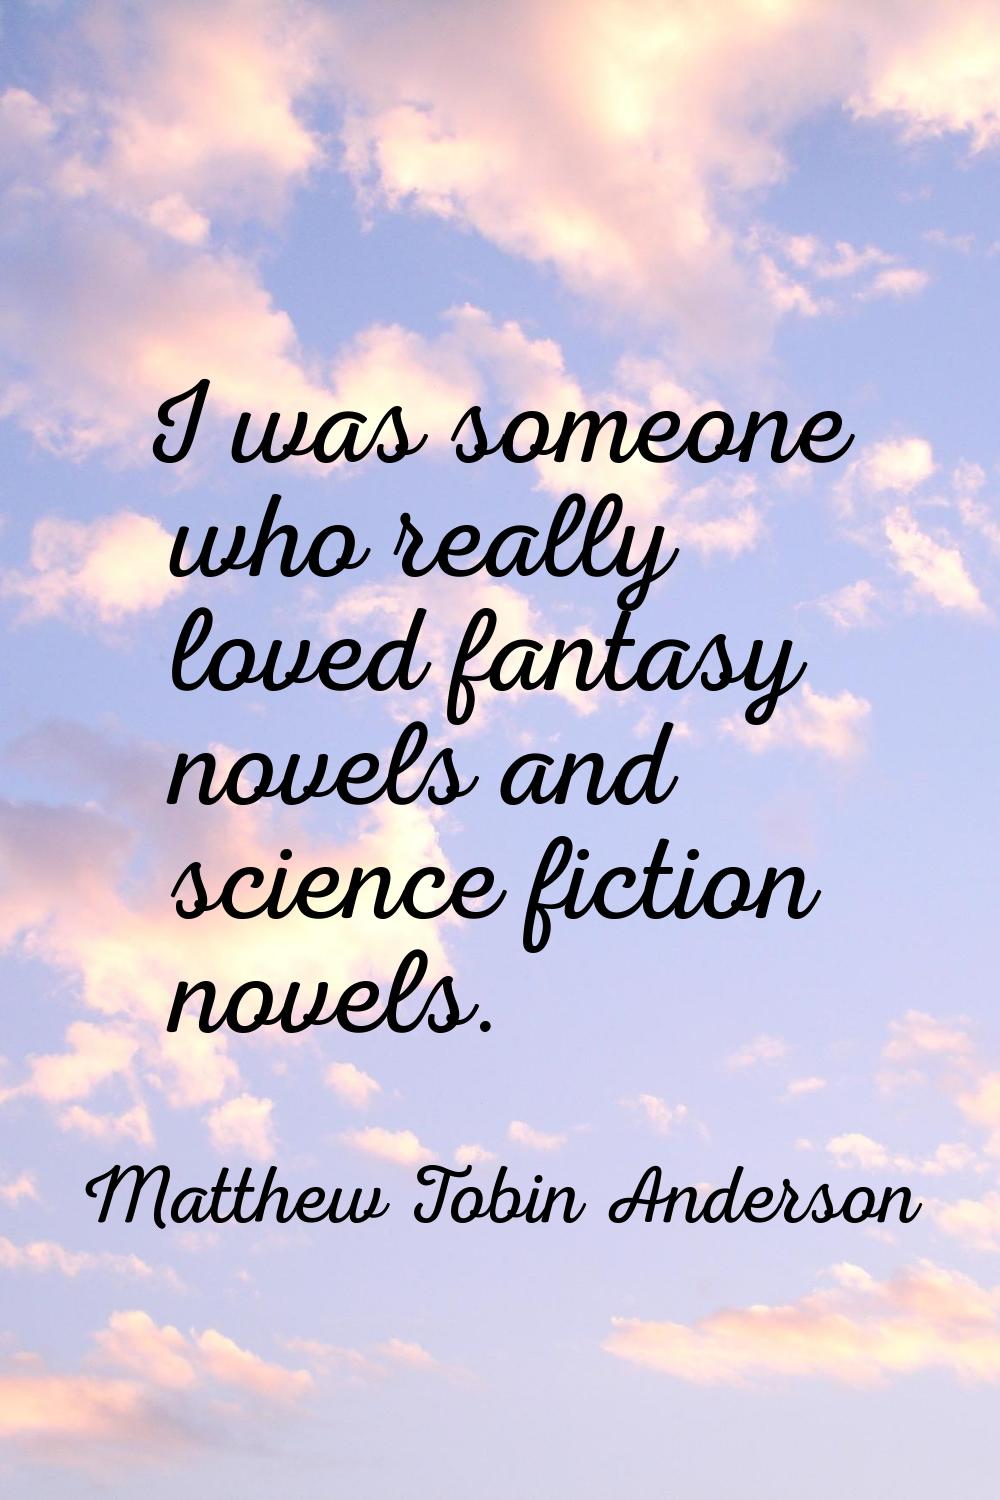 I was someone who really loved fantasy novels and science fiction novels.